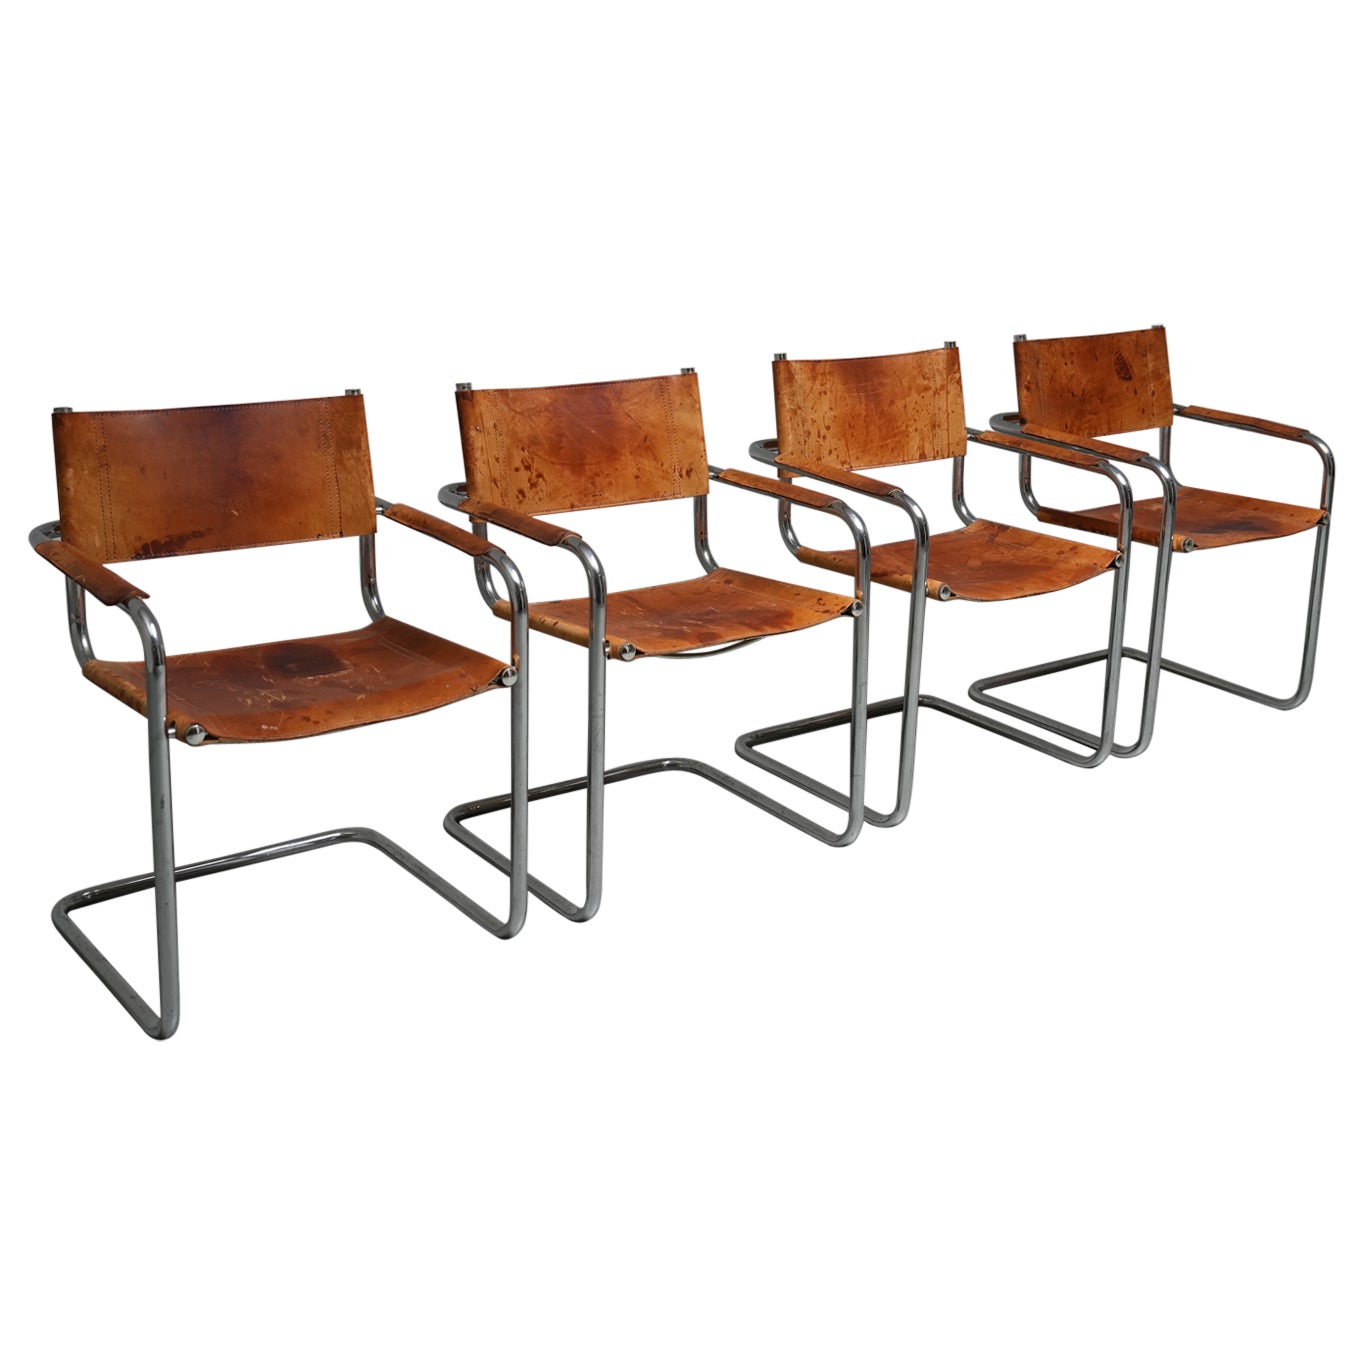 Set of 4 Dinging Chairs B 34 by Mart Stam in patinated leather, Italy, 1970's For Sale